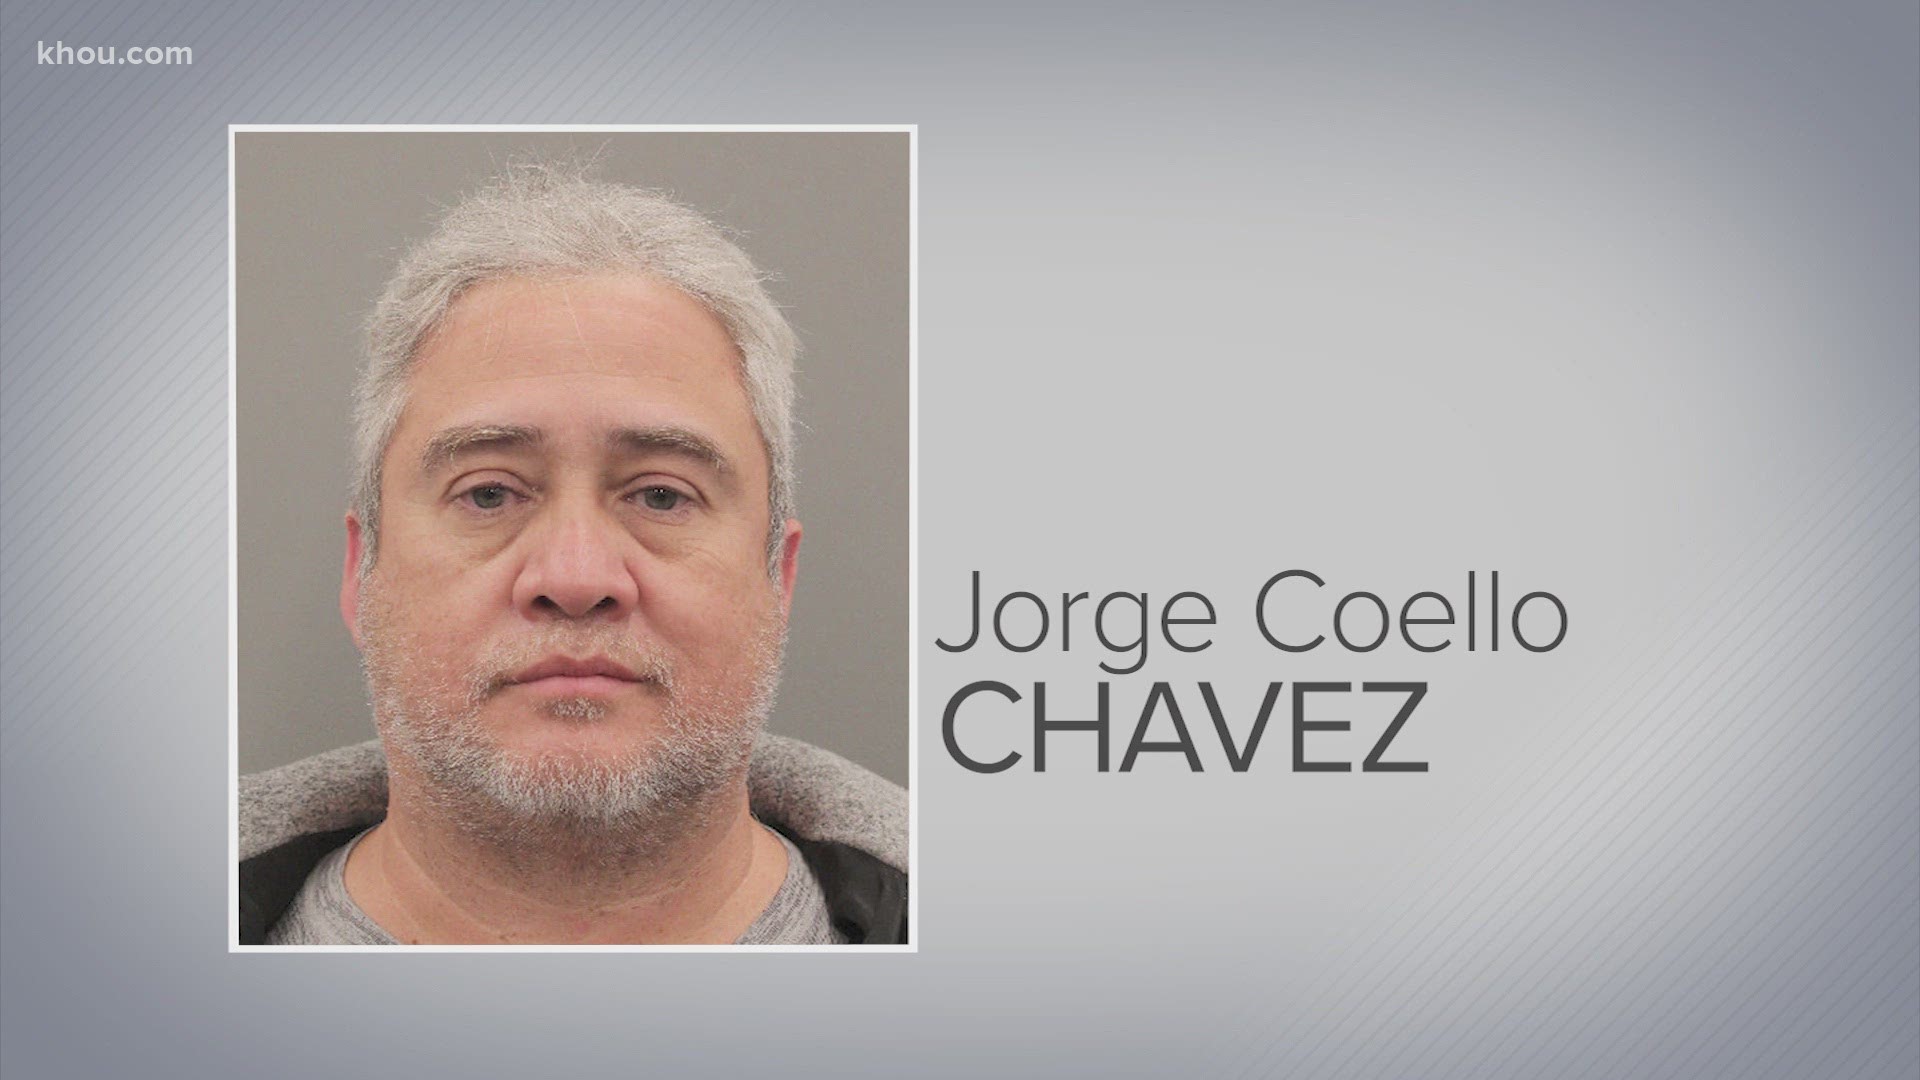 Homeland Security Investigations and Houston police arrested Jorge Antonio Coello Chavez, 50. He is charged with operating a stash house and human smuggling.